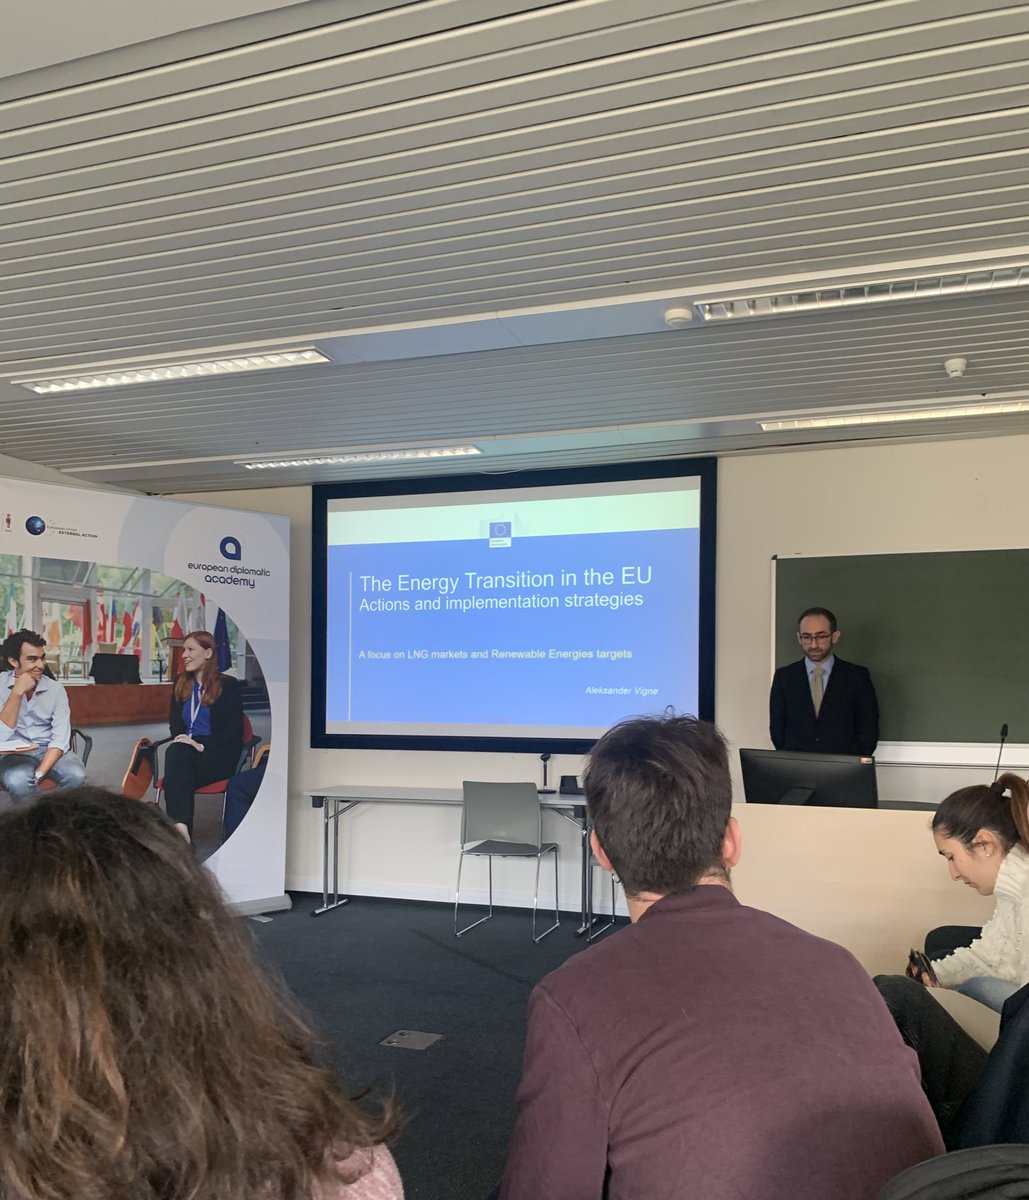 We kicked off our second workshop on #ClimateAndEnergy! This time about the Energy Transition and the current challenges with LNG with @EU_Commission Policy Expert #AleksanderVigne